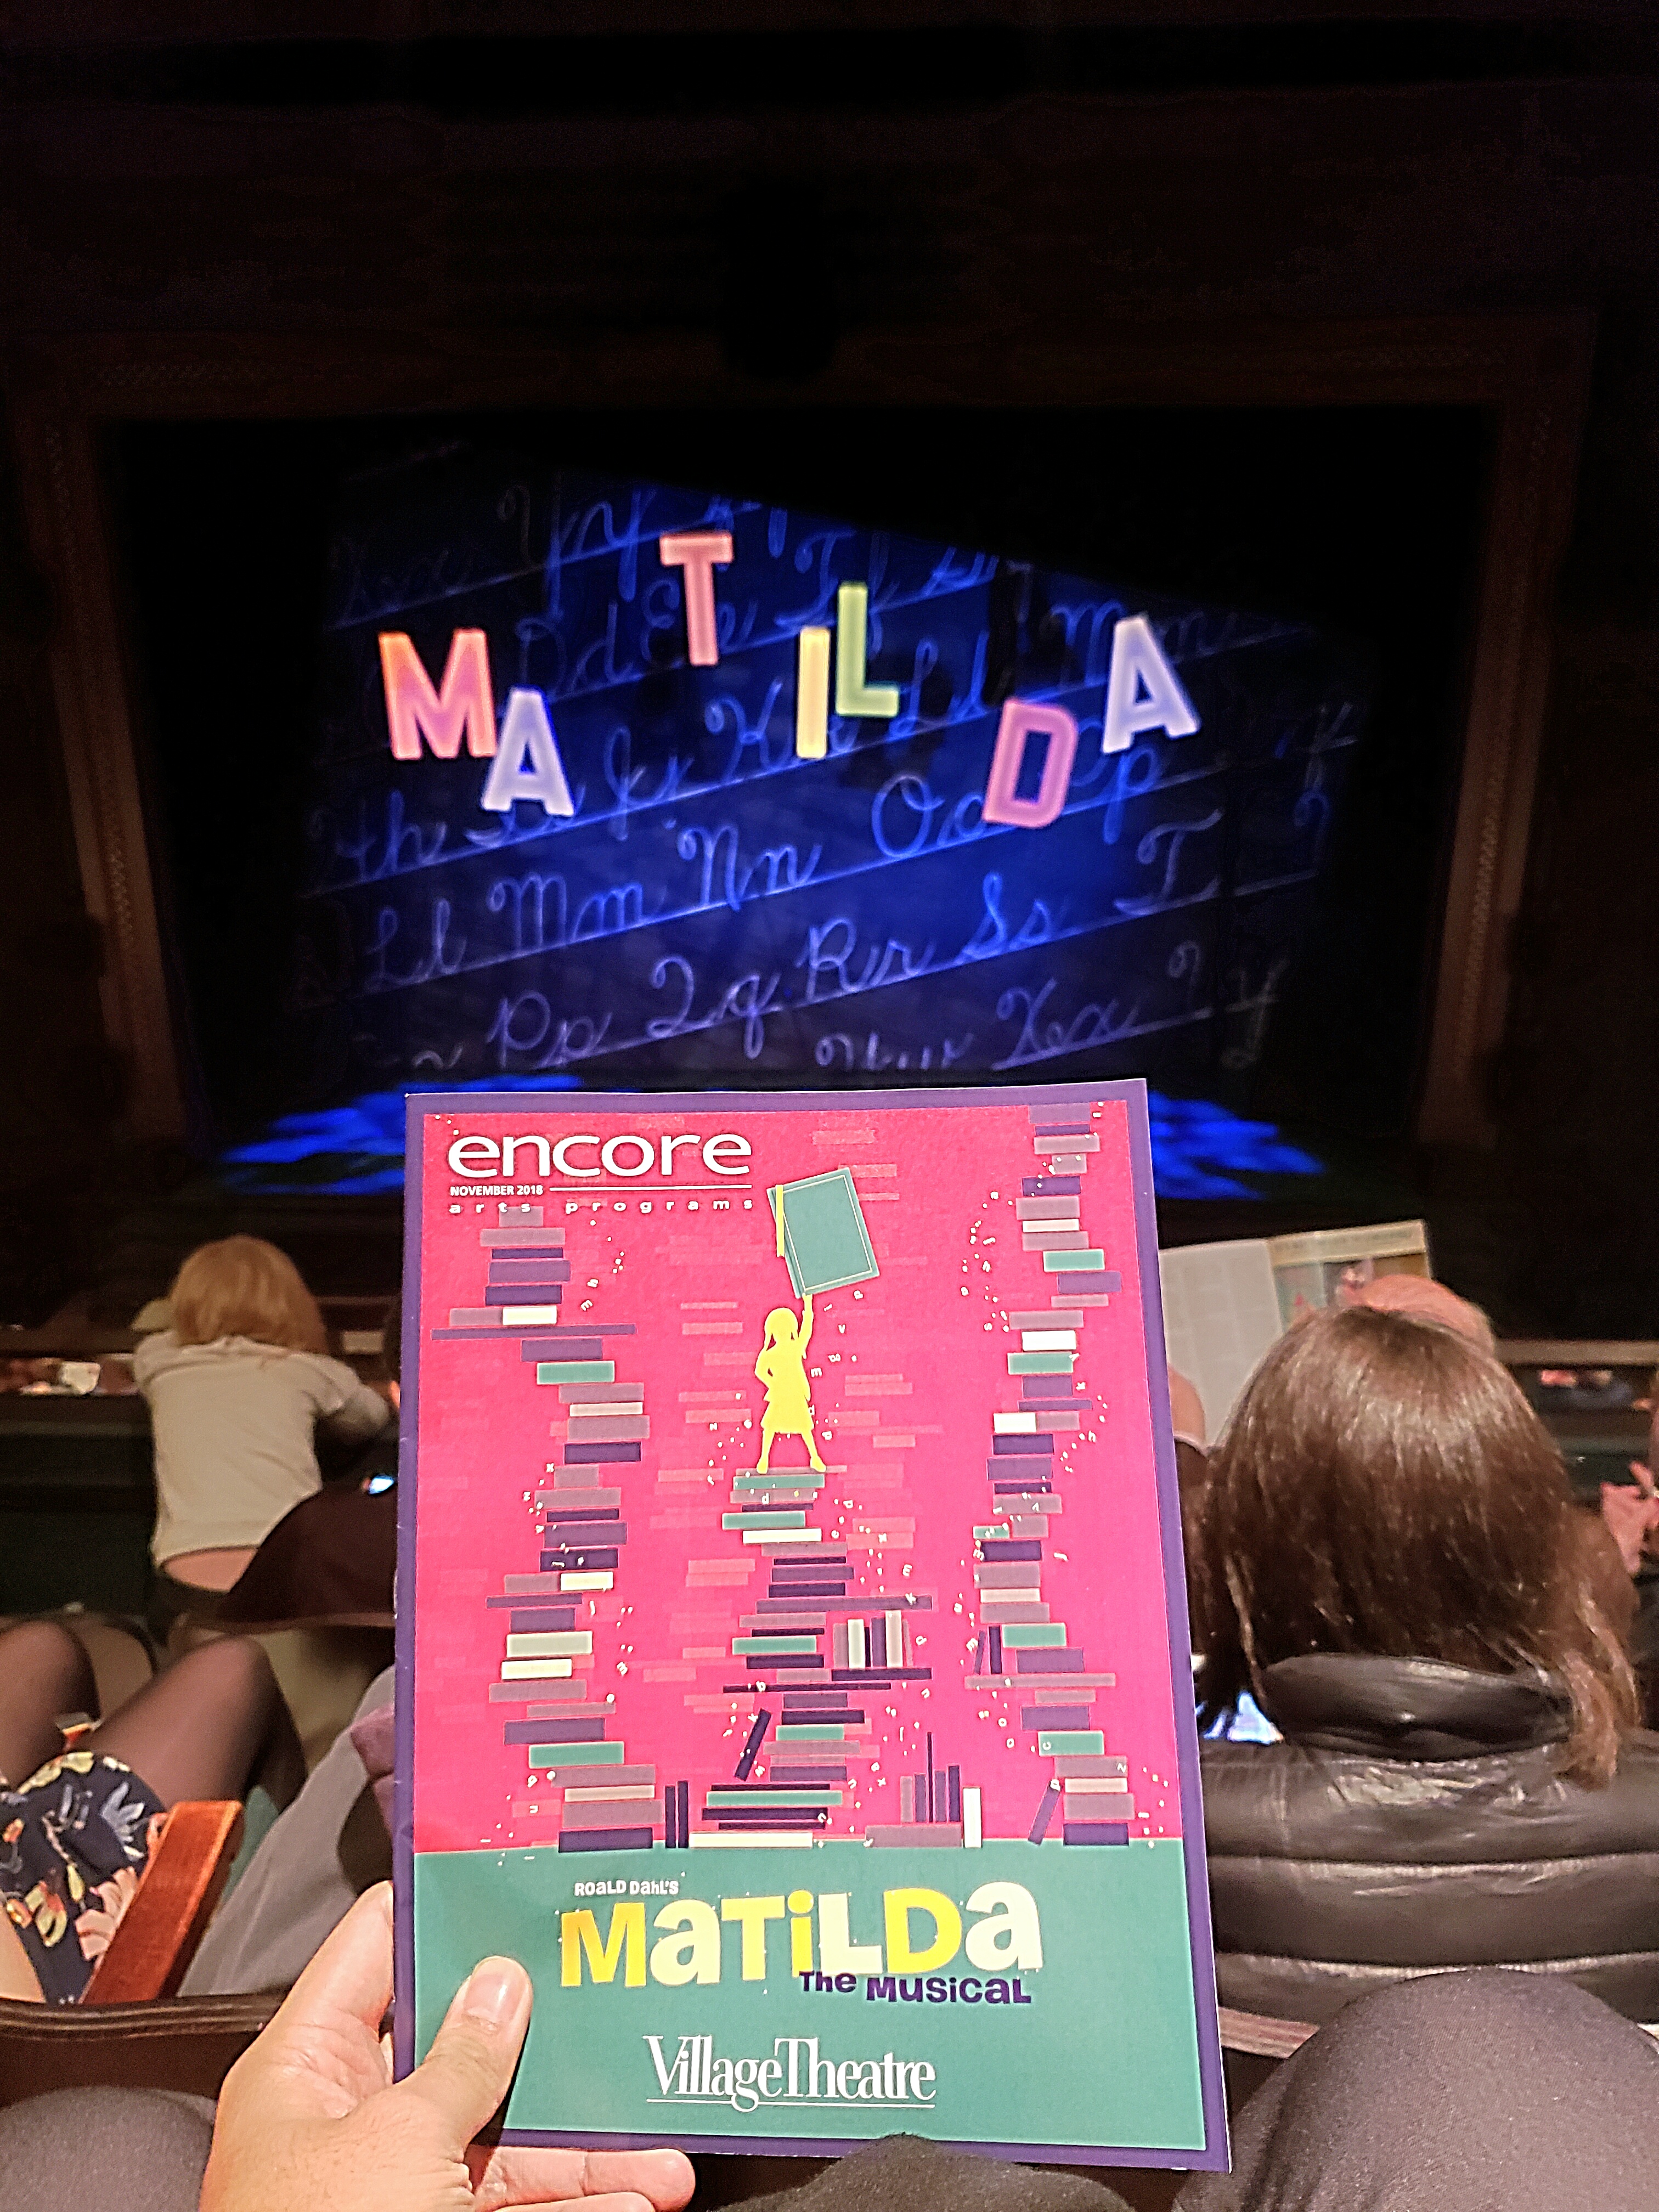 Watched Matilda The Musical, based on Roald Dahl's book. Takes me back to elementary! Too kid-friendly though ... but figured I shouldn't let my season ticket go to waste. Great quality like the national tour.